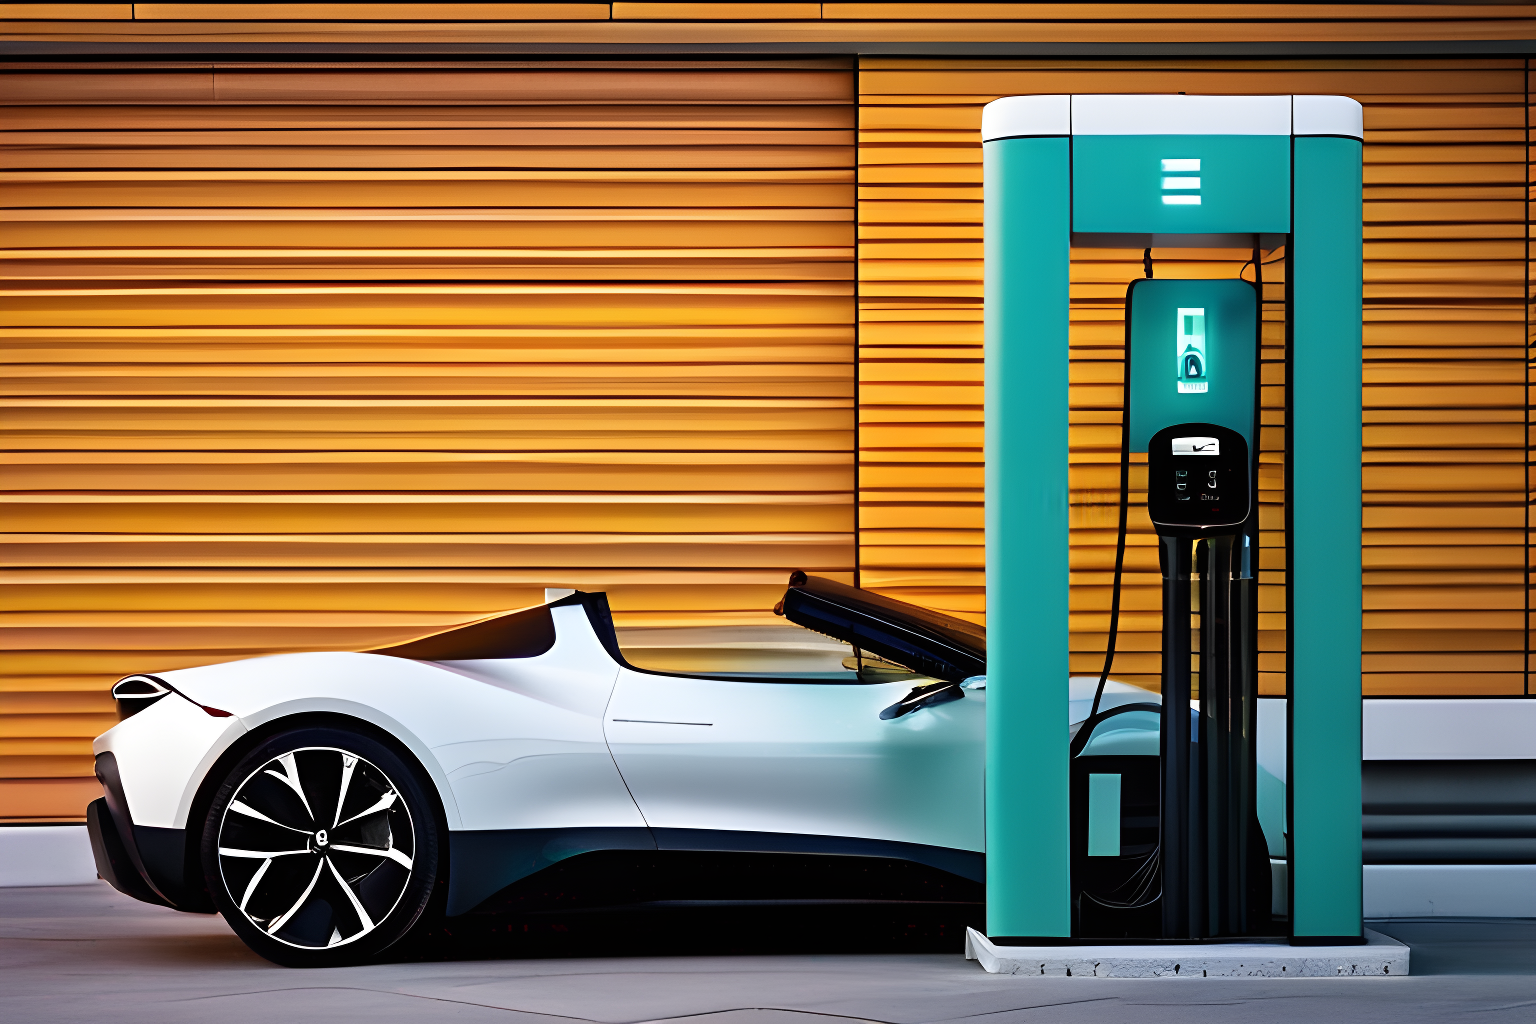 Breathtaking photograph of an electric vehicle connected to a charging station.